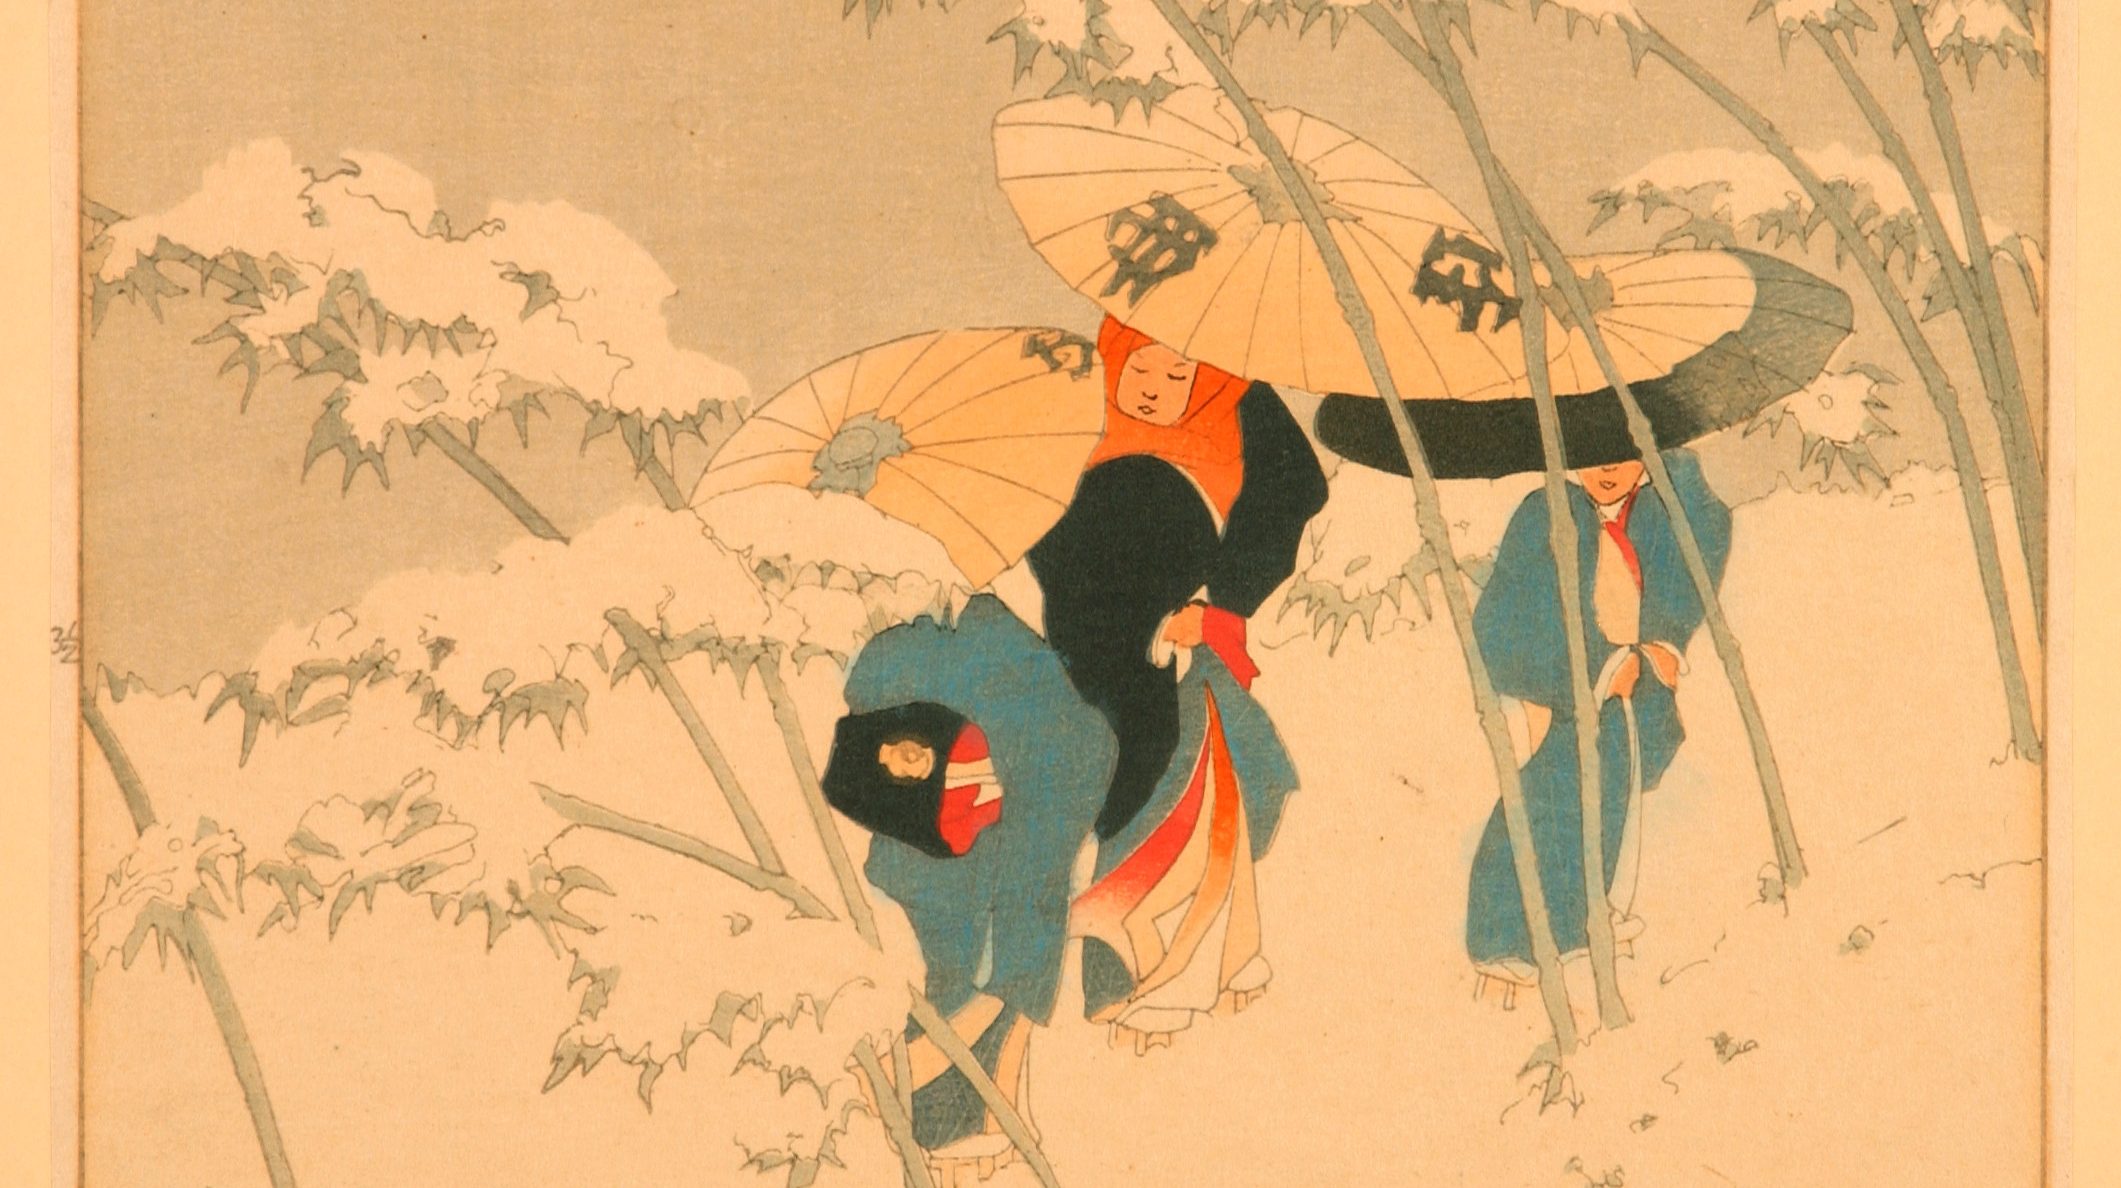 Three people covered in blue and orange cloaks hold umbrellas and walk up hill through bamboo trees.